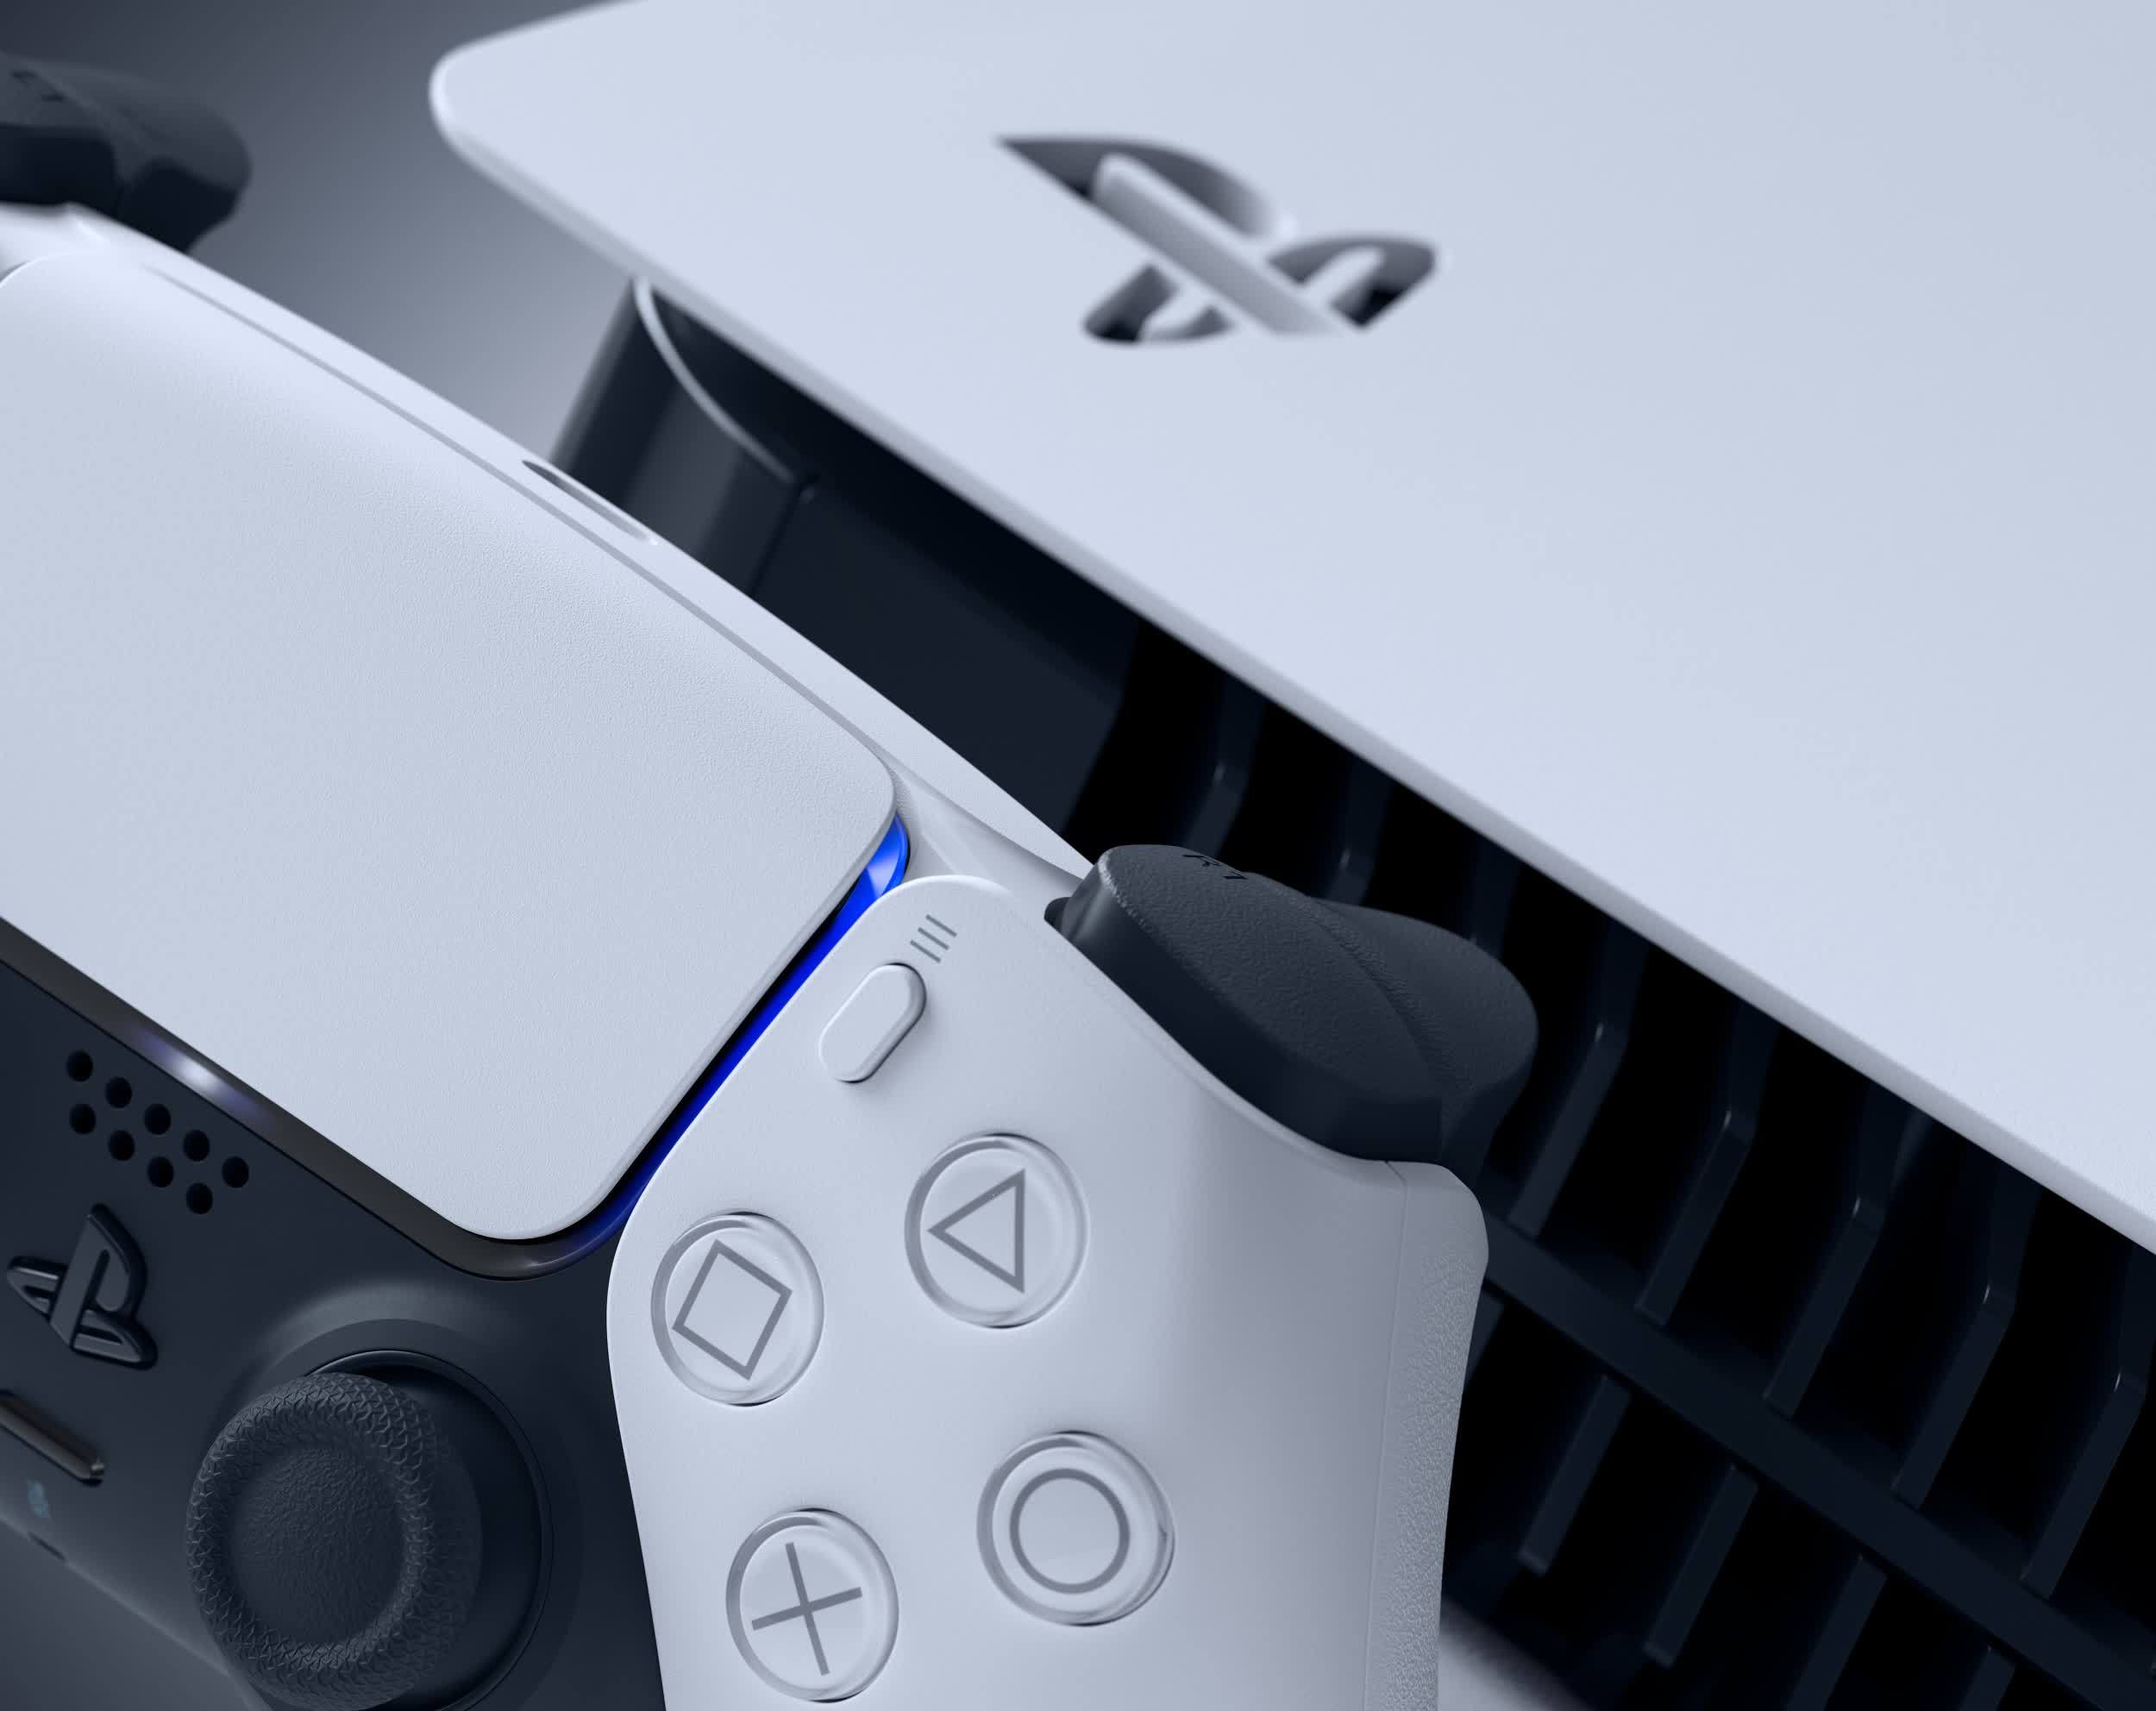 UK politicians want to ban PS5, Xbox Series X, and PC component scalping